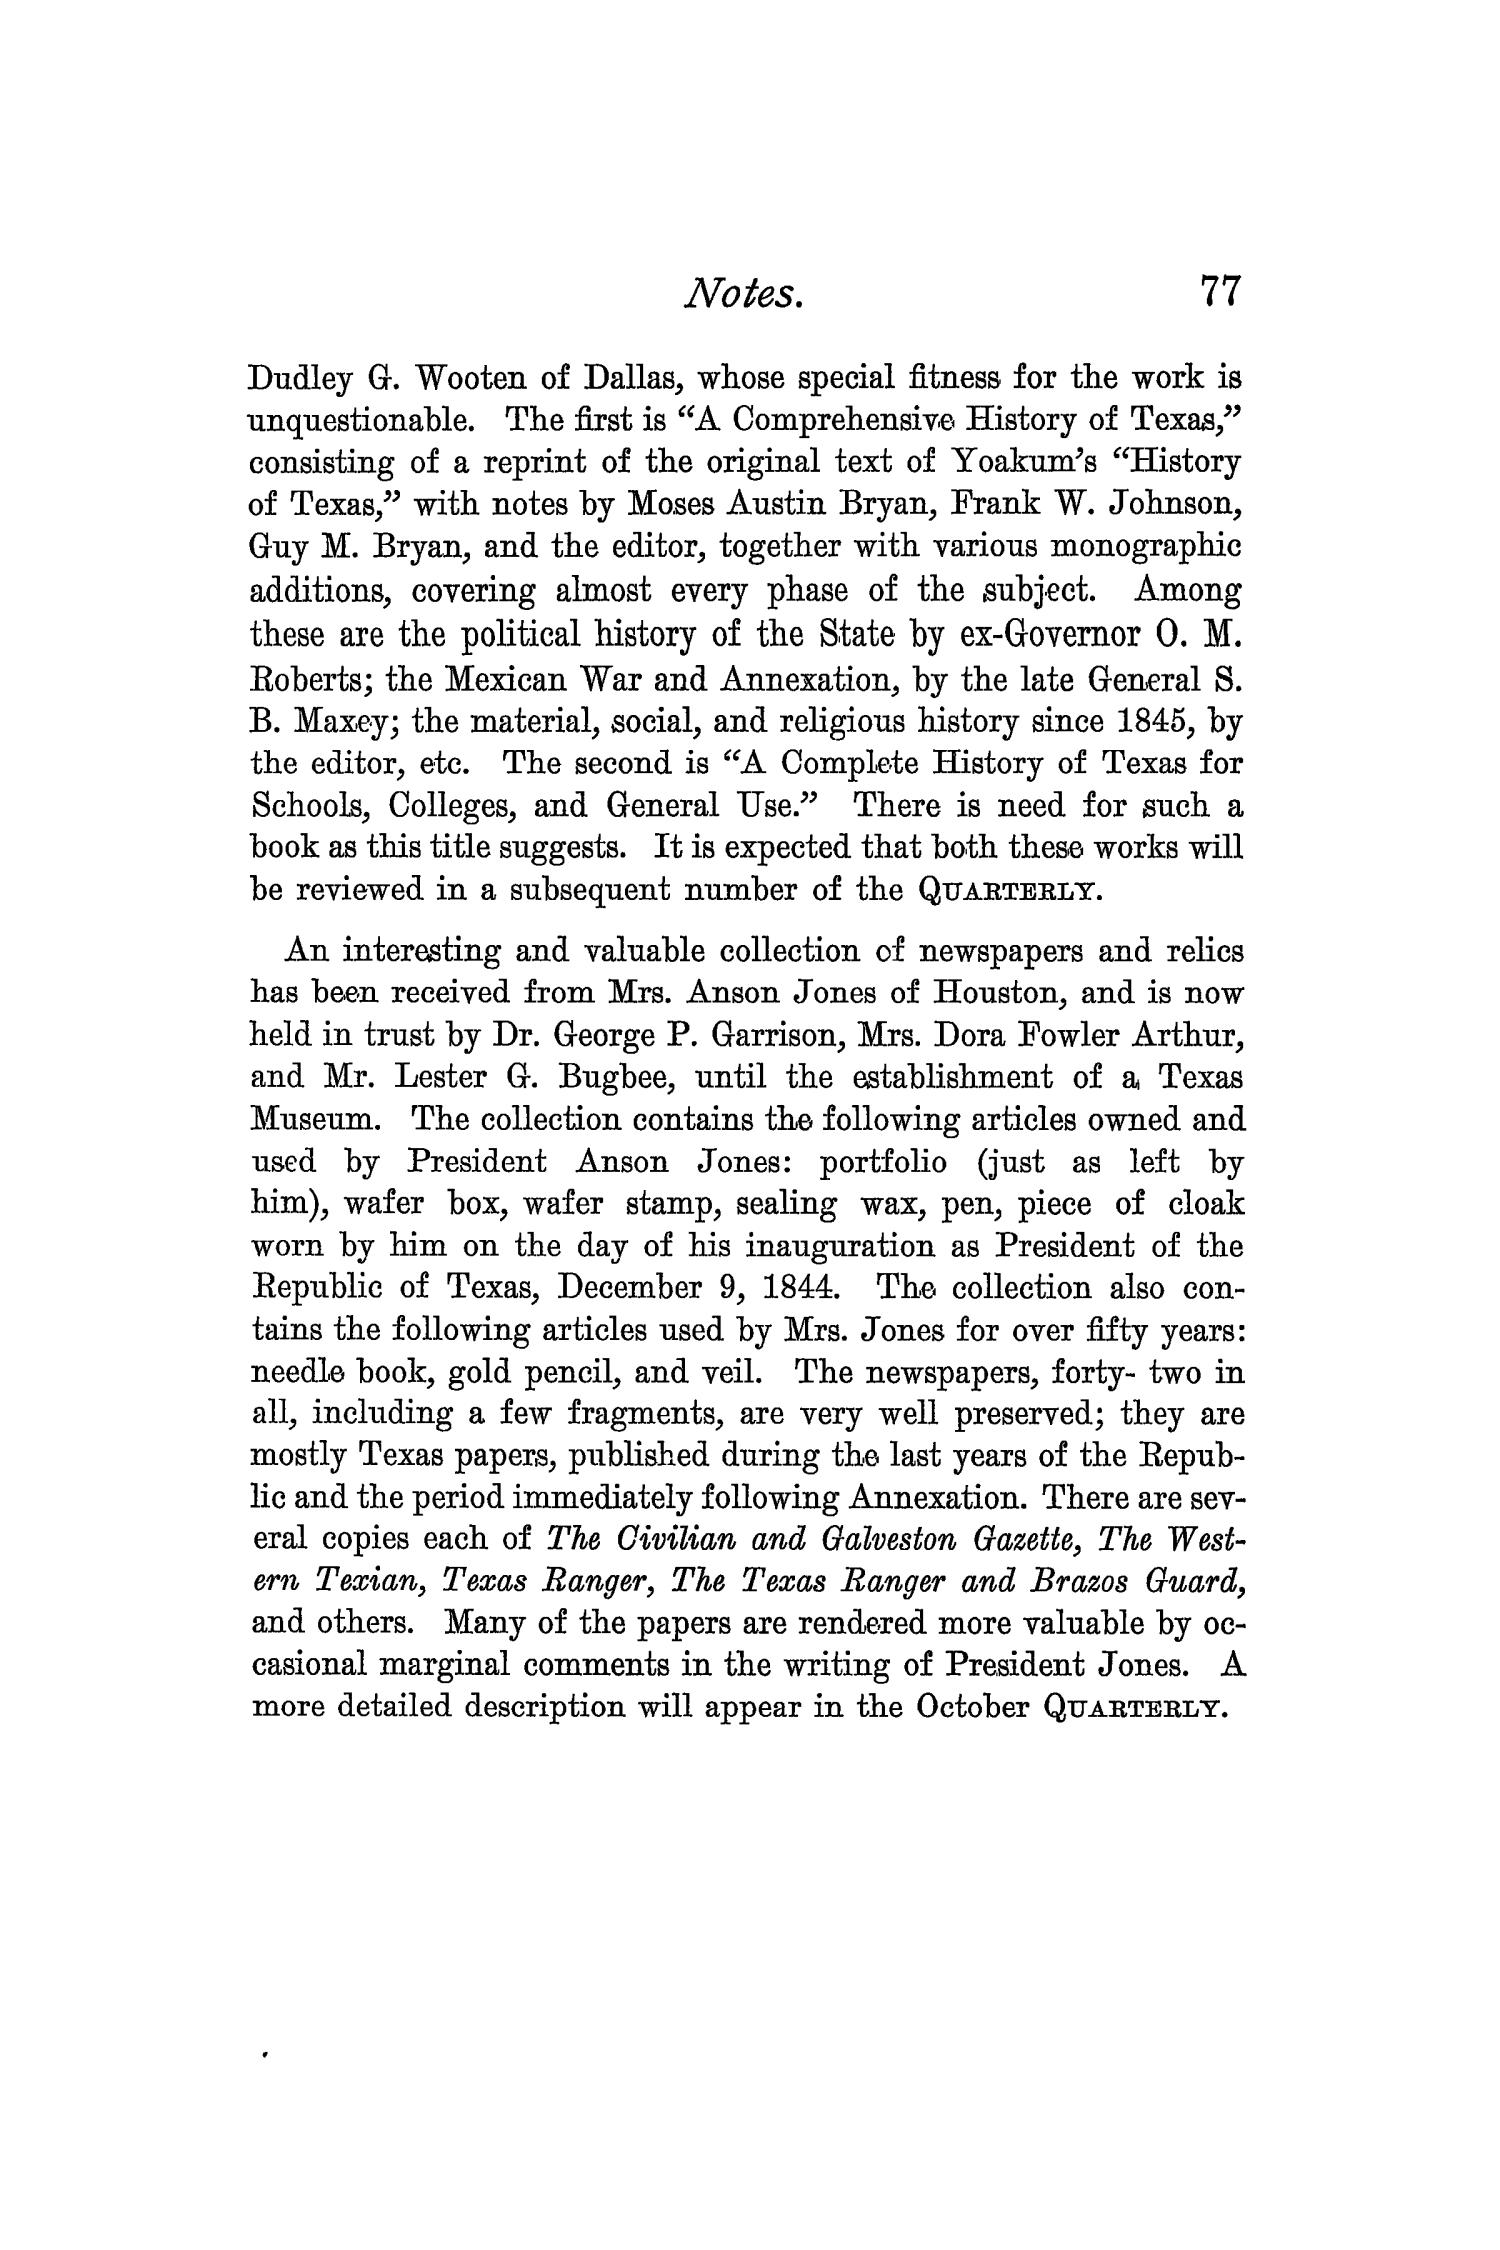 The Quarterly of the Texas State Historical Association, Volume 1, July 1897 - April, 1898
                                                
                                                    77
                                                